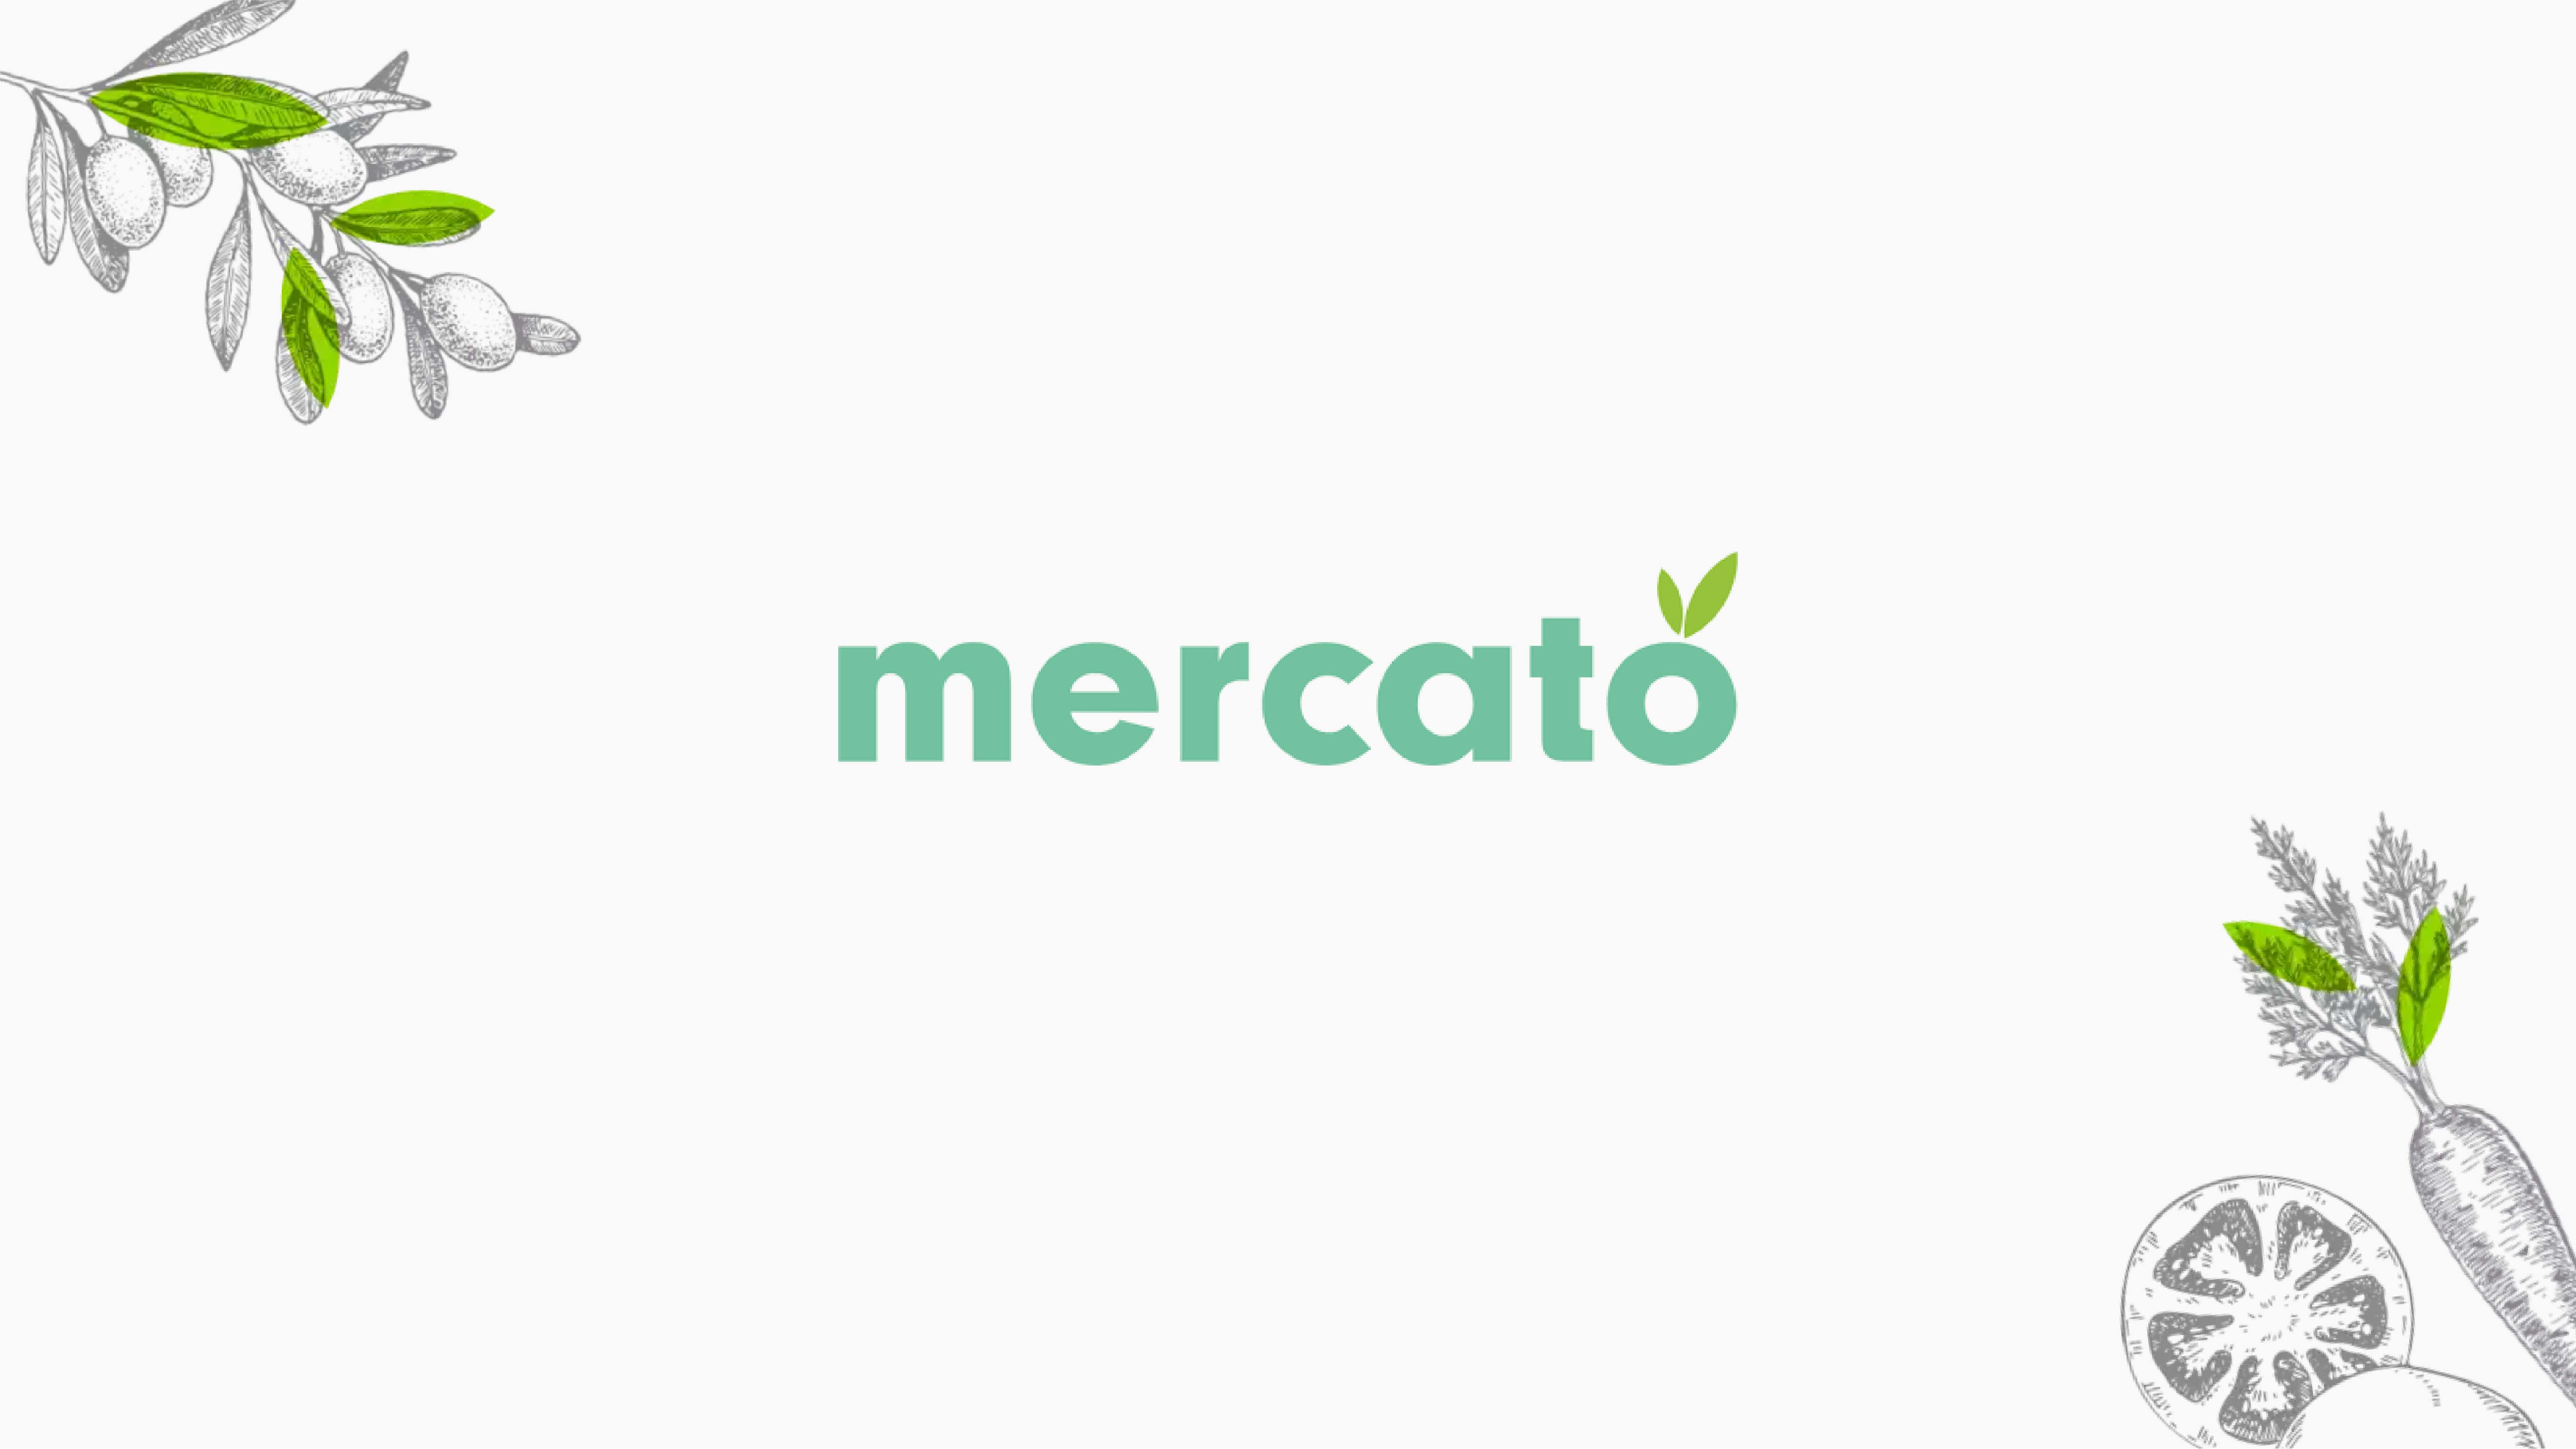 Mercato Groceries2Go logo paired with illustrations of an olive branch, carrot, and tomato